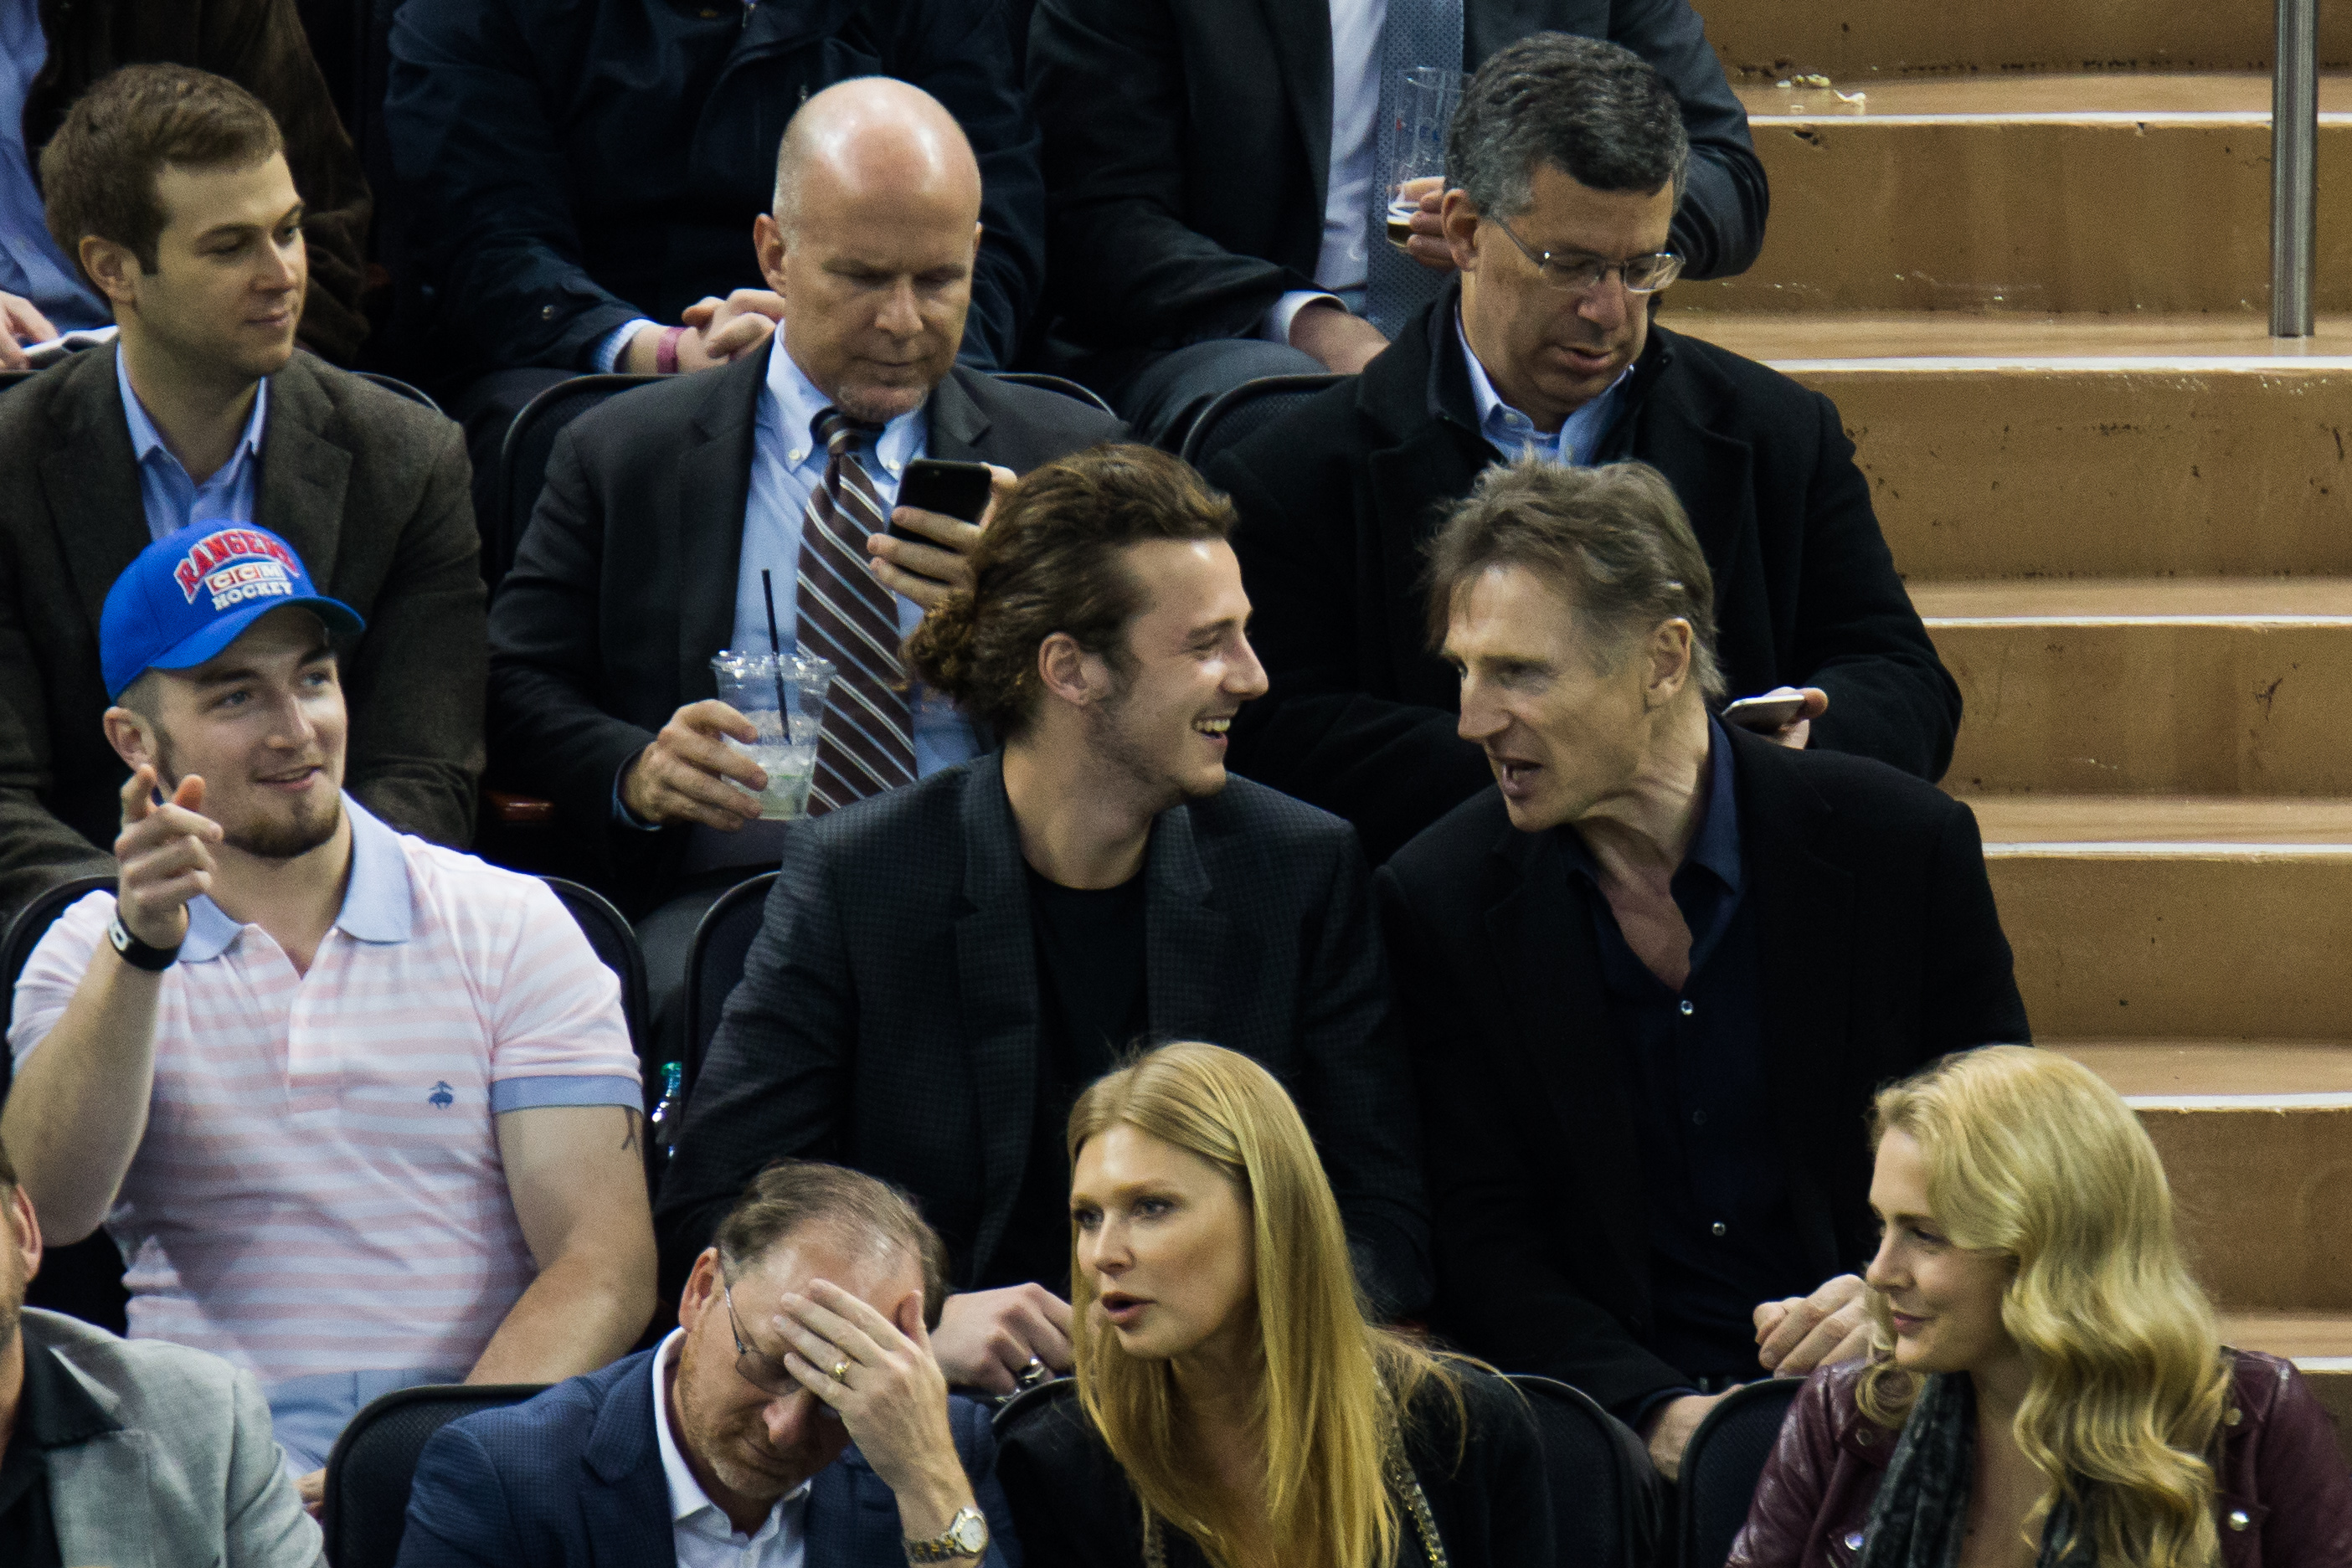 Liam Neeson, Daniel Neeson, and Micheal Neeson on March 23, 2016 in New York City | Source: Getty Images